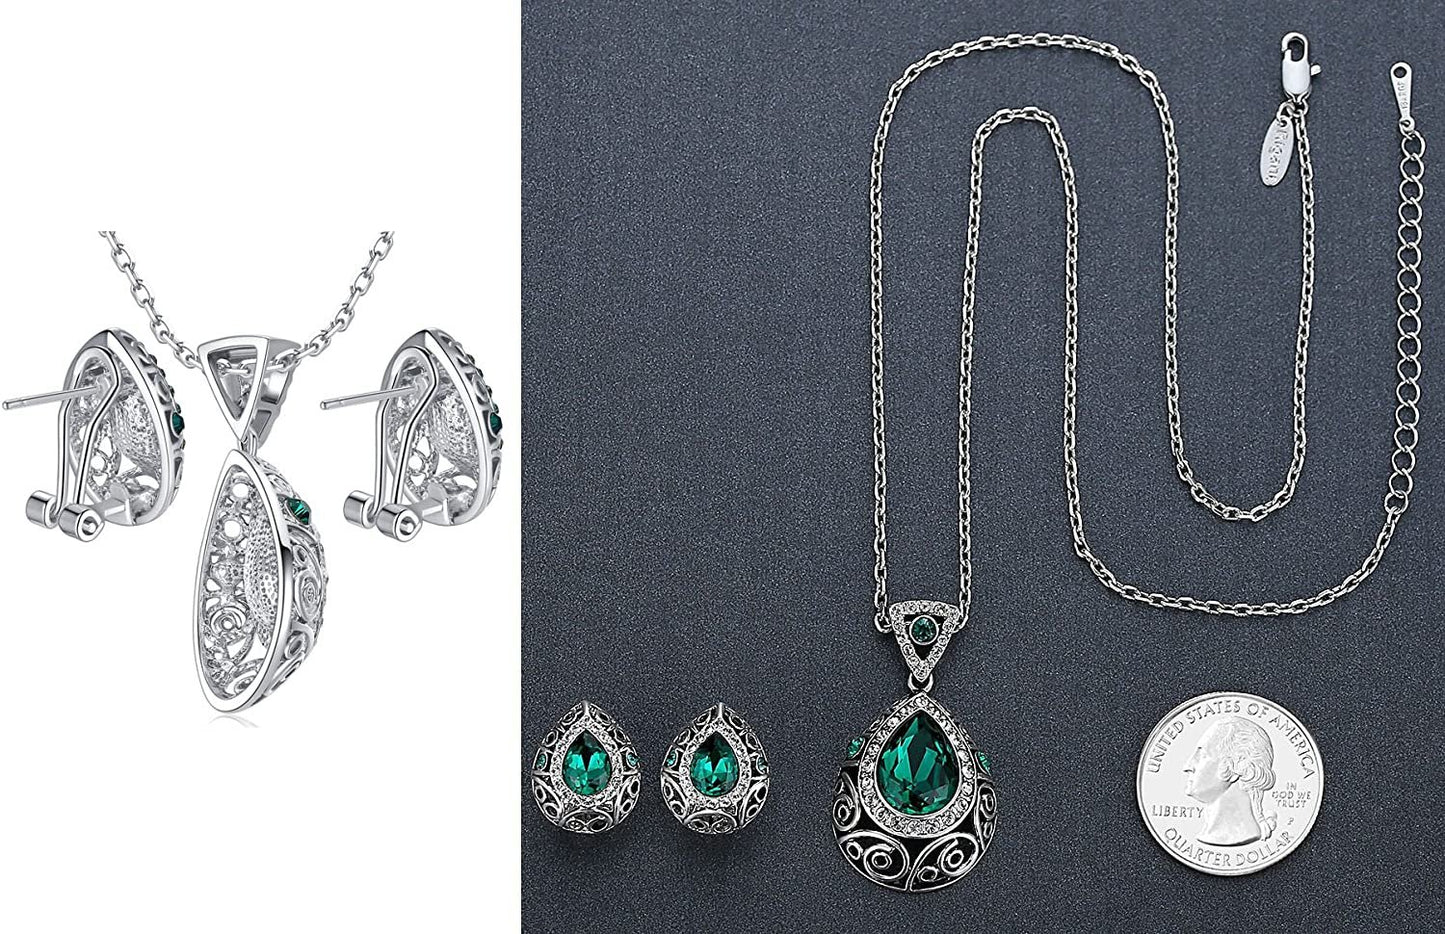 Leafael [Presented by Miss New York] Teardrop Filigree Vintage Style Jewelry Set Earrings Pendant Necklace Made with Premium Crystals, Silver-Tone, 18" + 2", Nickel/Lead Box